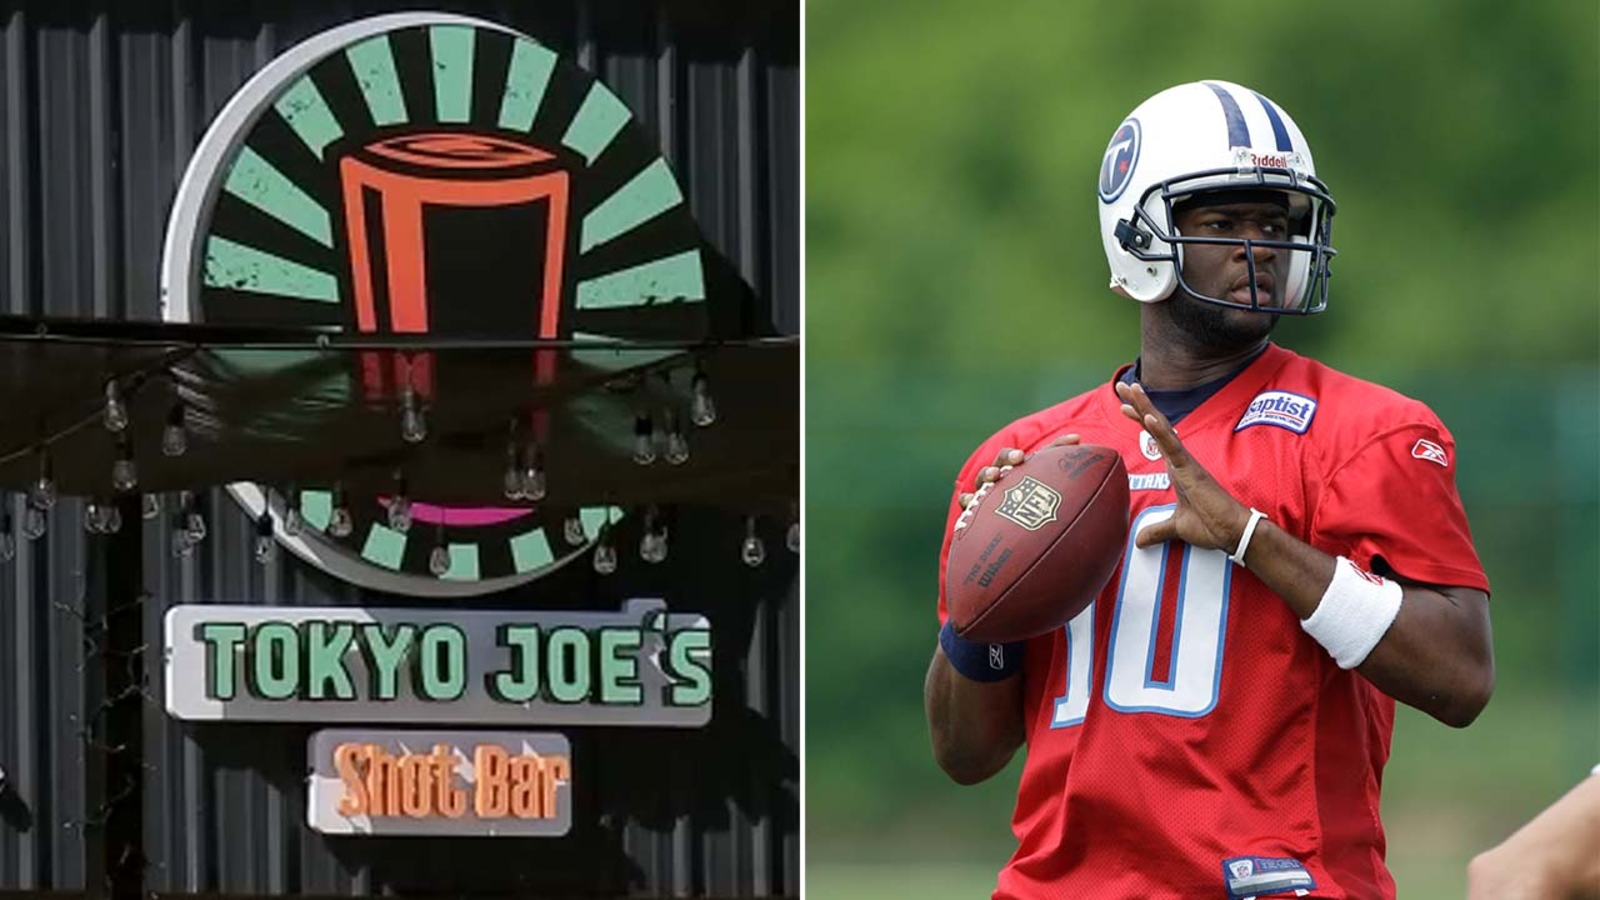 Vince Young fight: Former NFL quarterback knocked out cold in brawl at Heights bar, but manager says he’s caused problems before [Video]